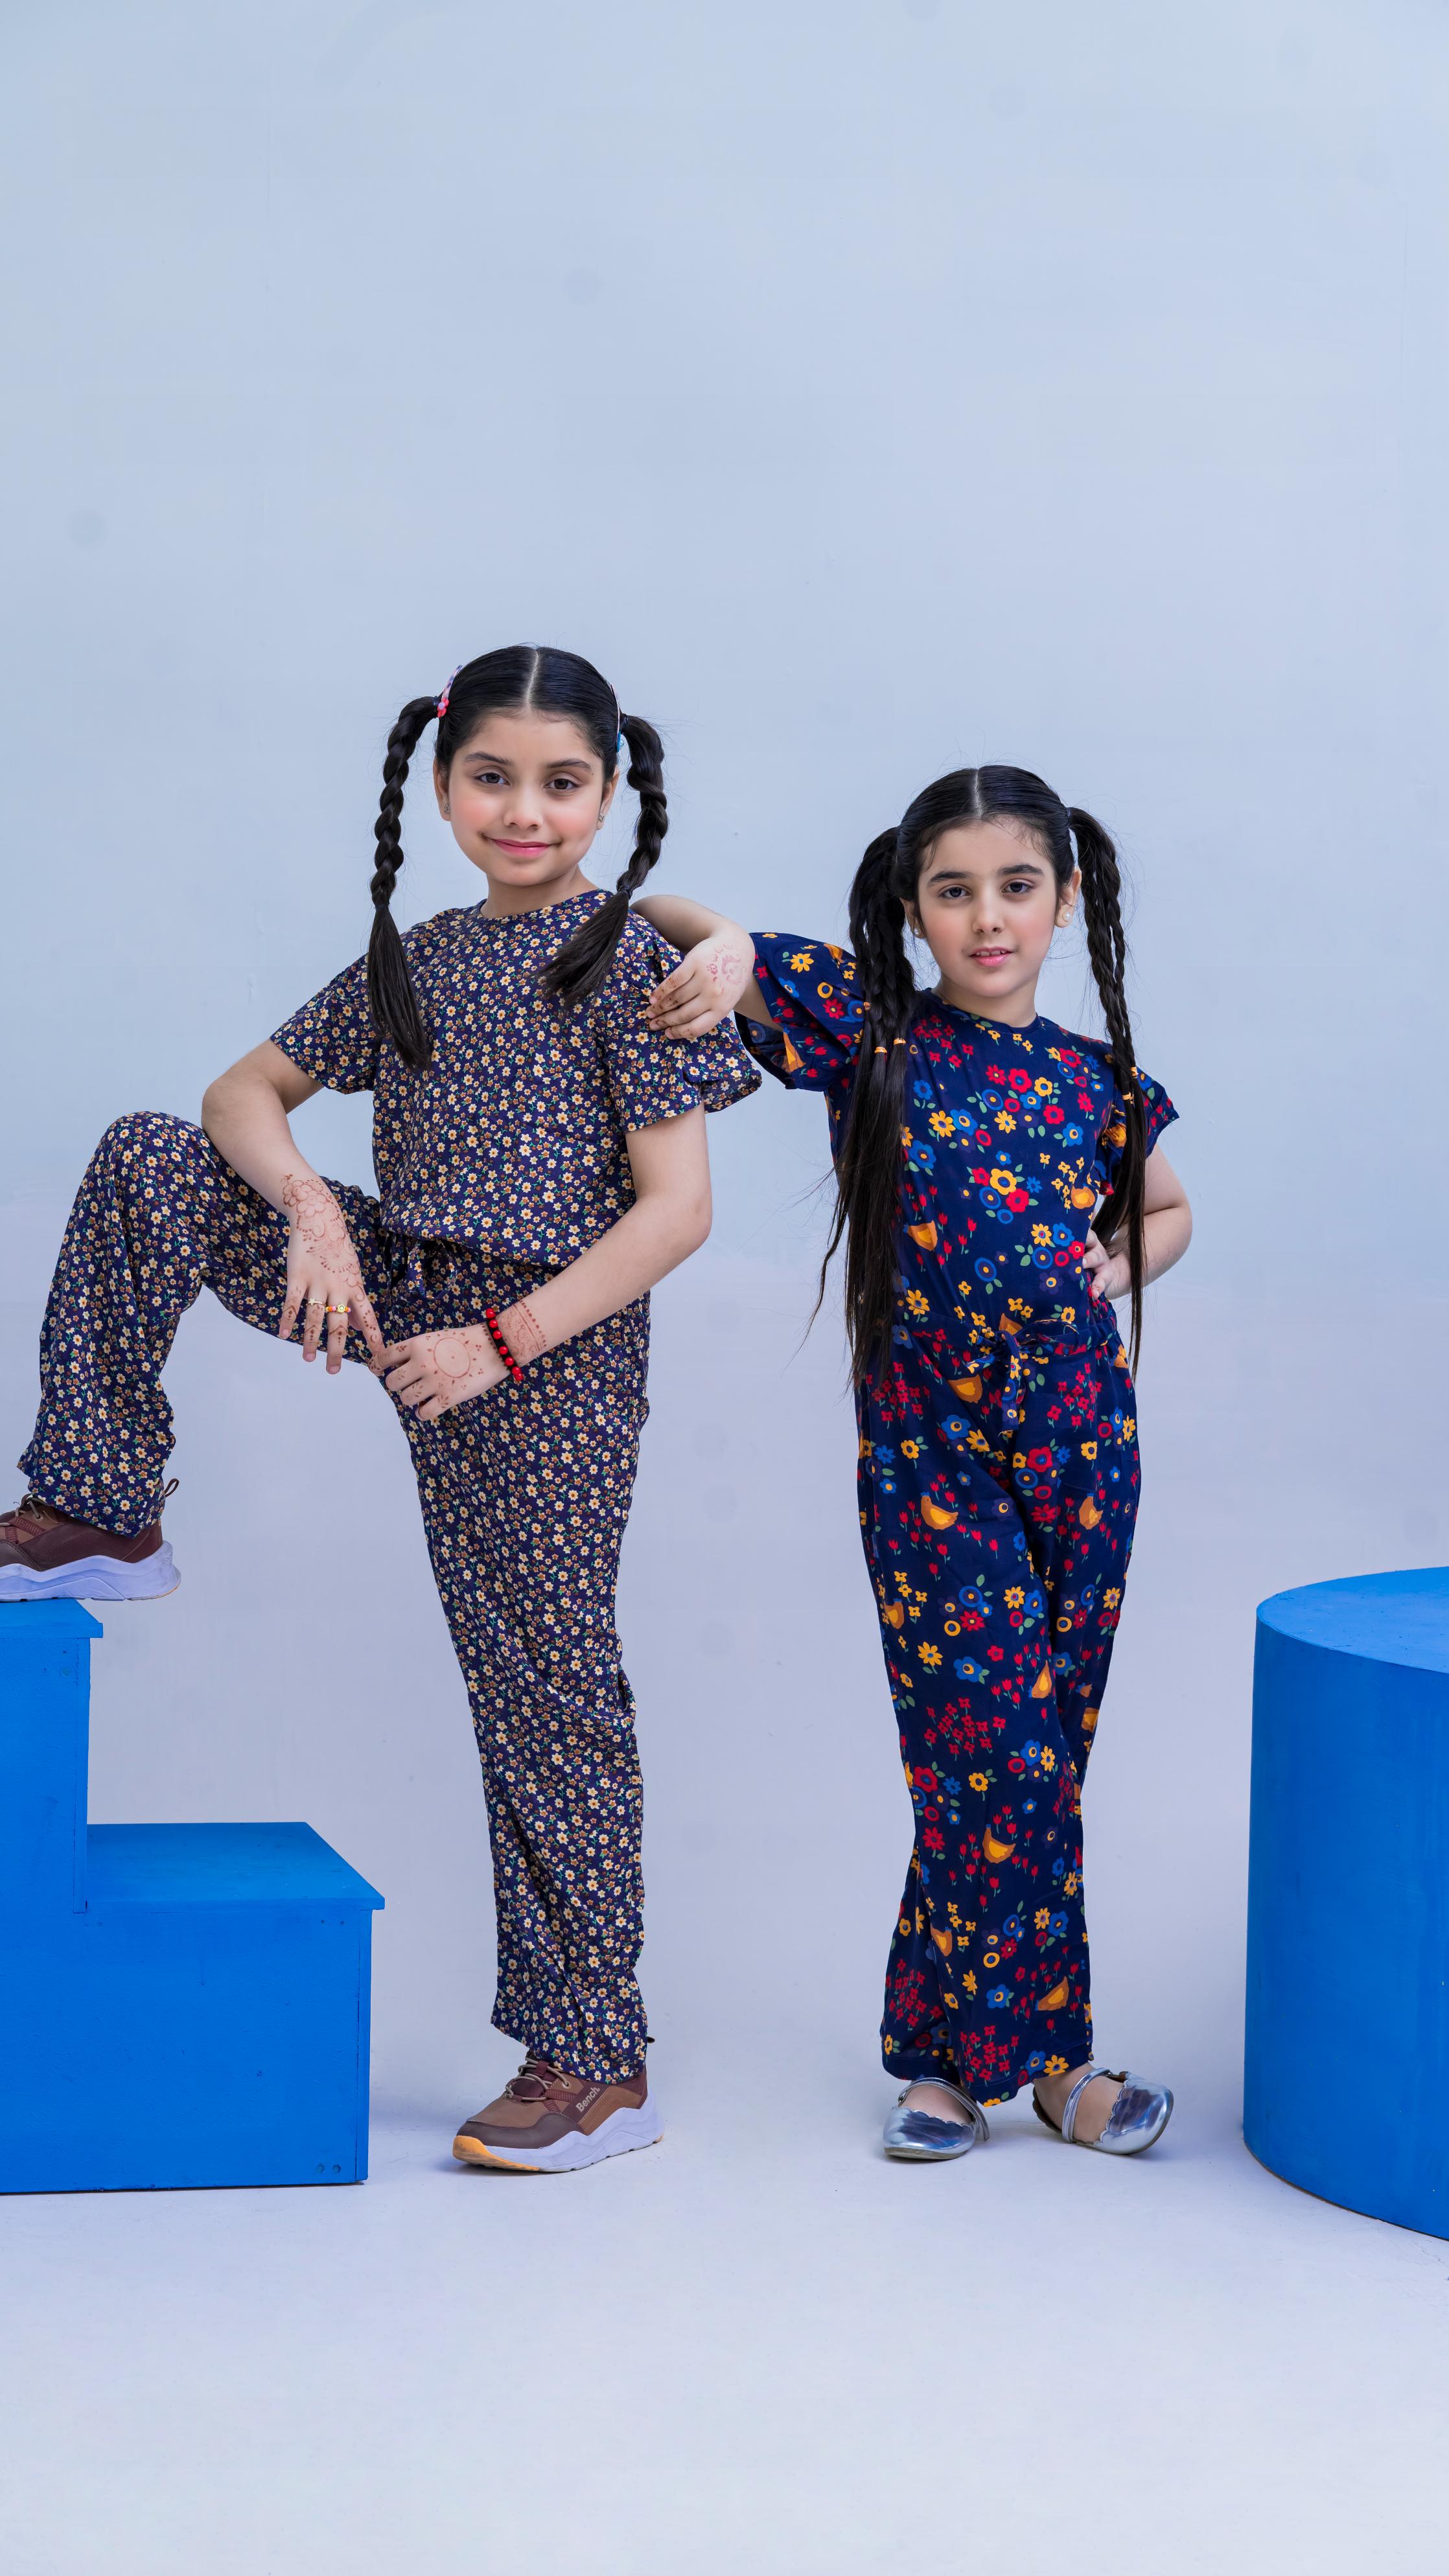 Allover Flowers Print Belted Jumpsuit Girls-2403-Navy